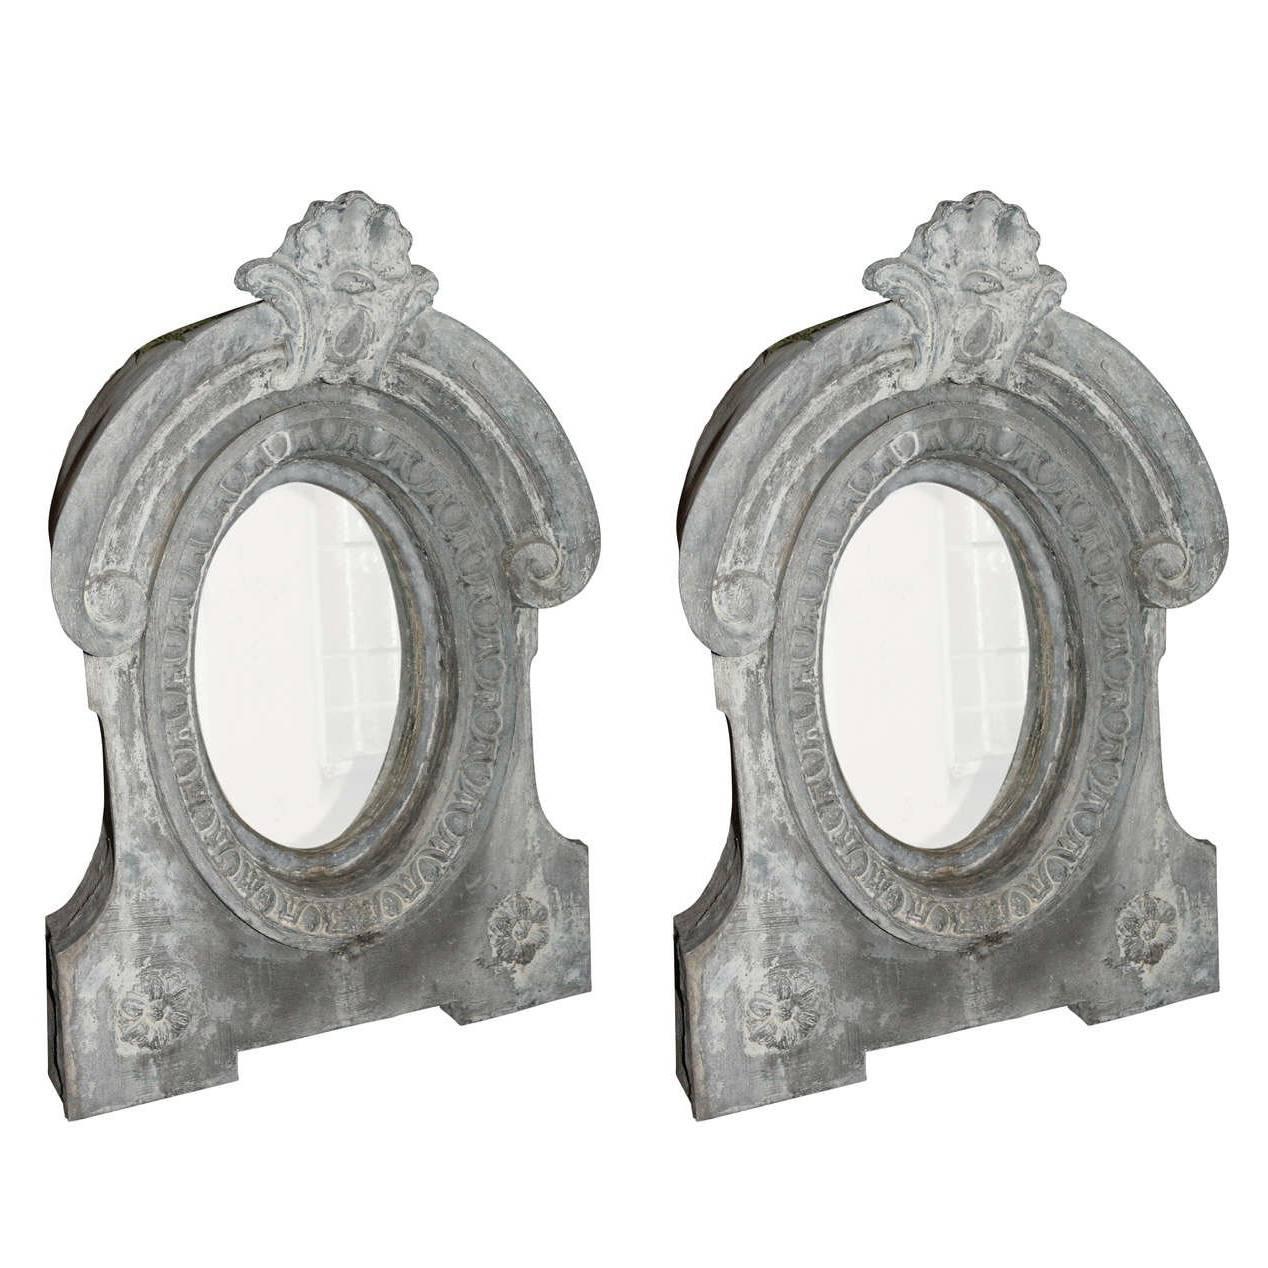 Pair of Architectural Dormer Mirrors